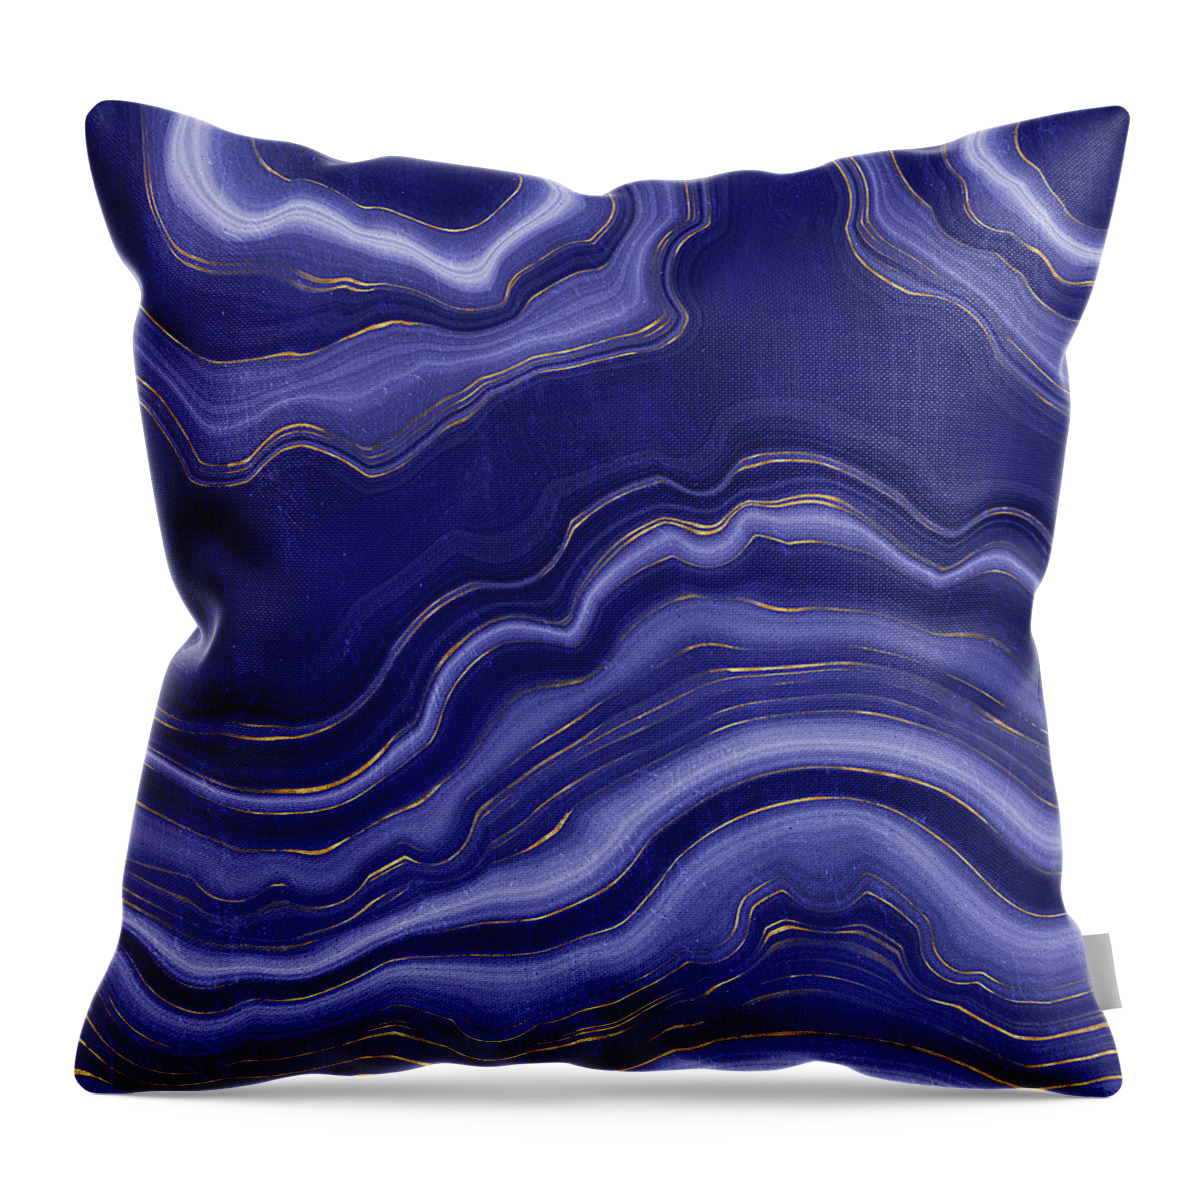 Blue Agate Throw Pillow featuring the painting Blue Agate With Gold by Modern Art